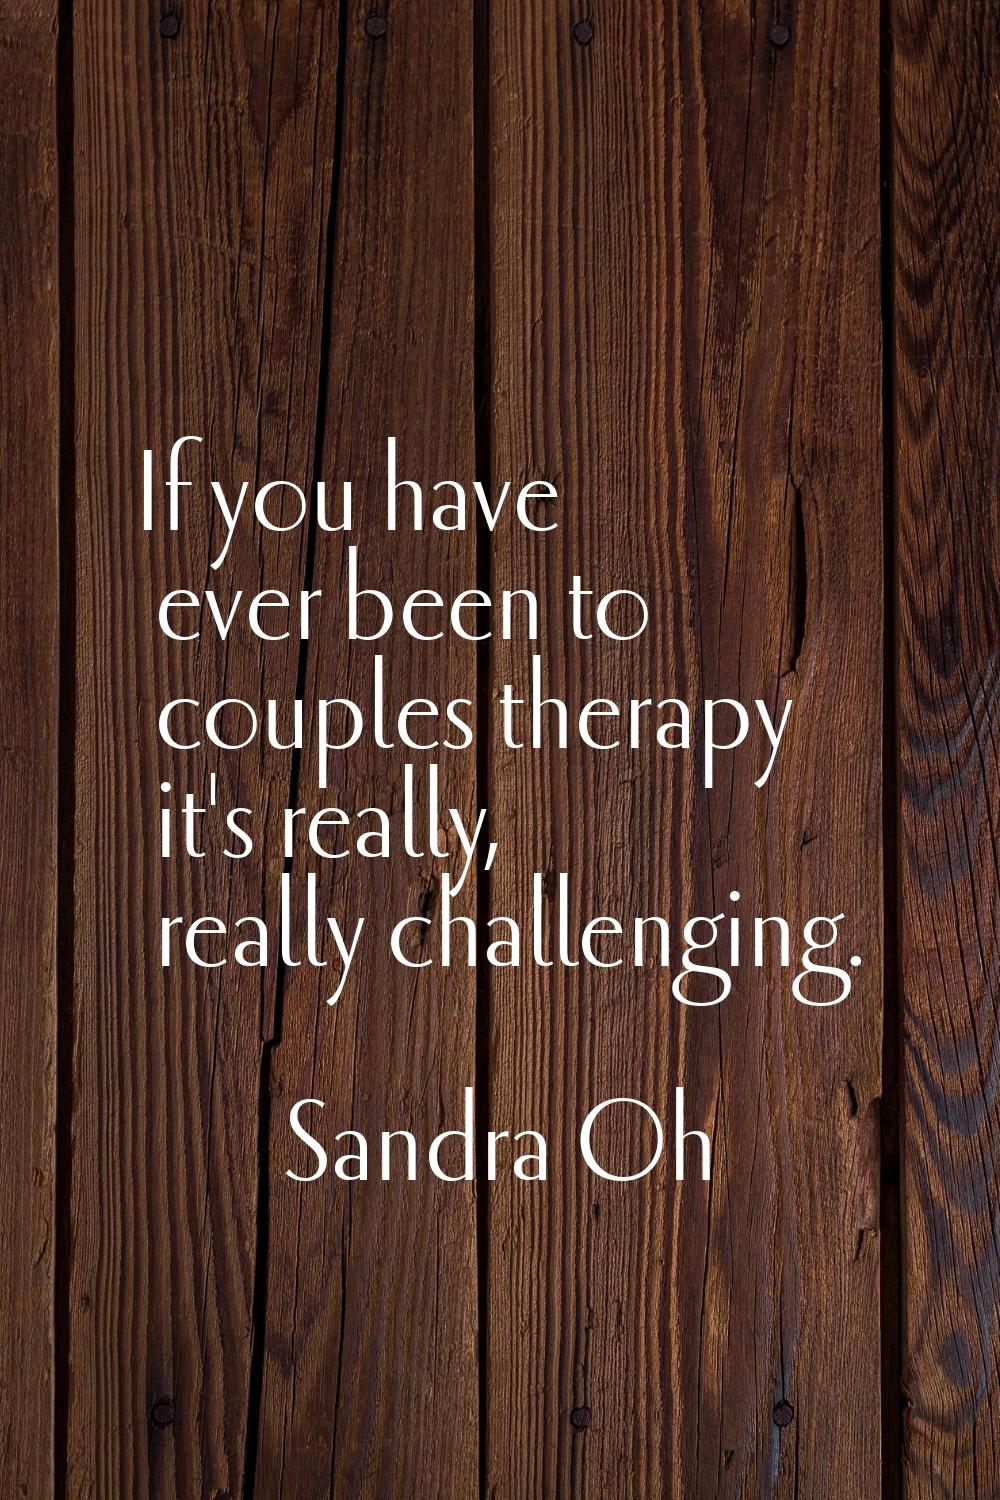 If you have ever been to couples therapy it's really, really challenging.